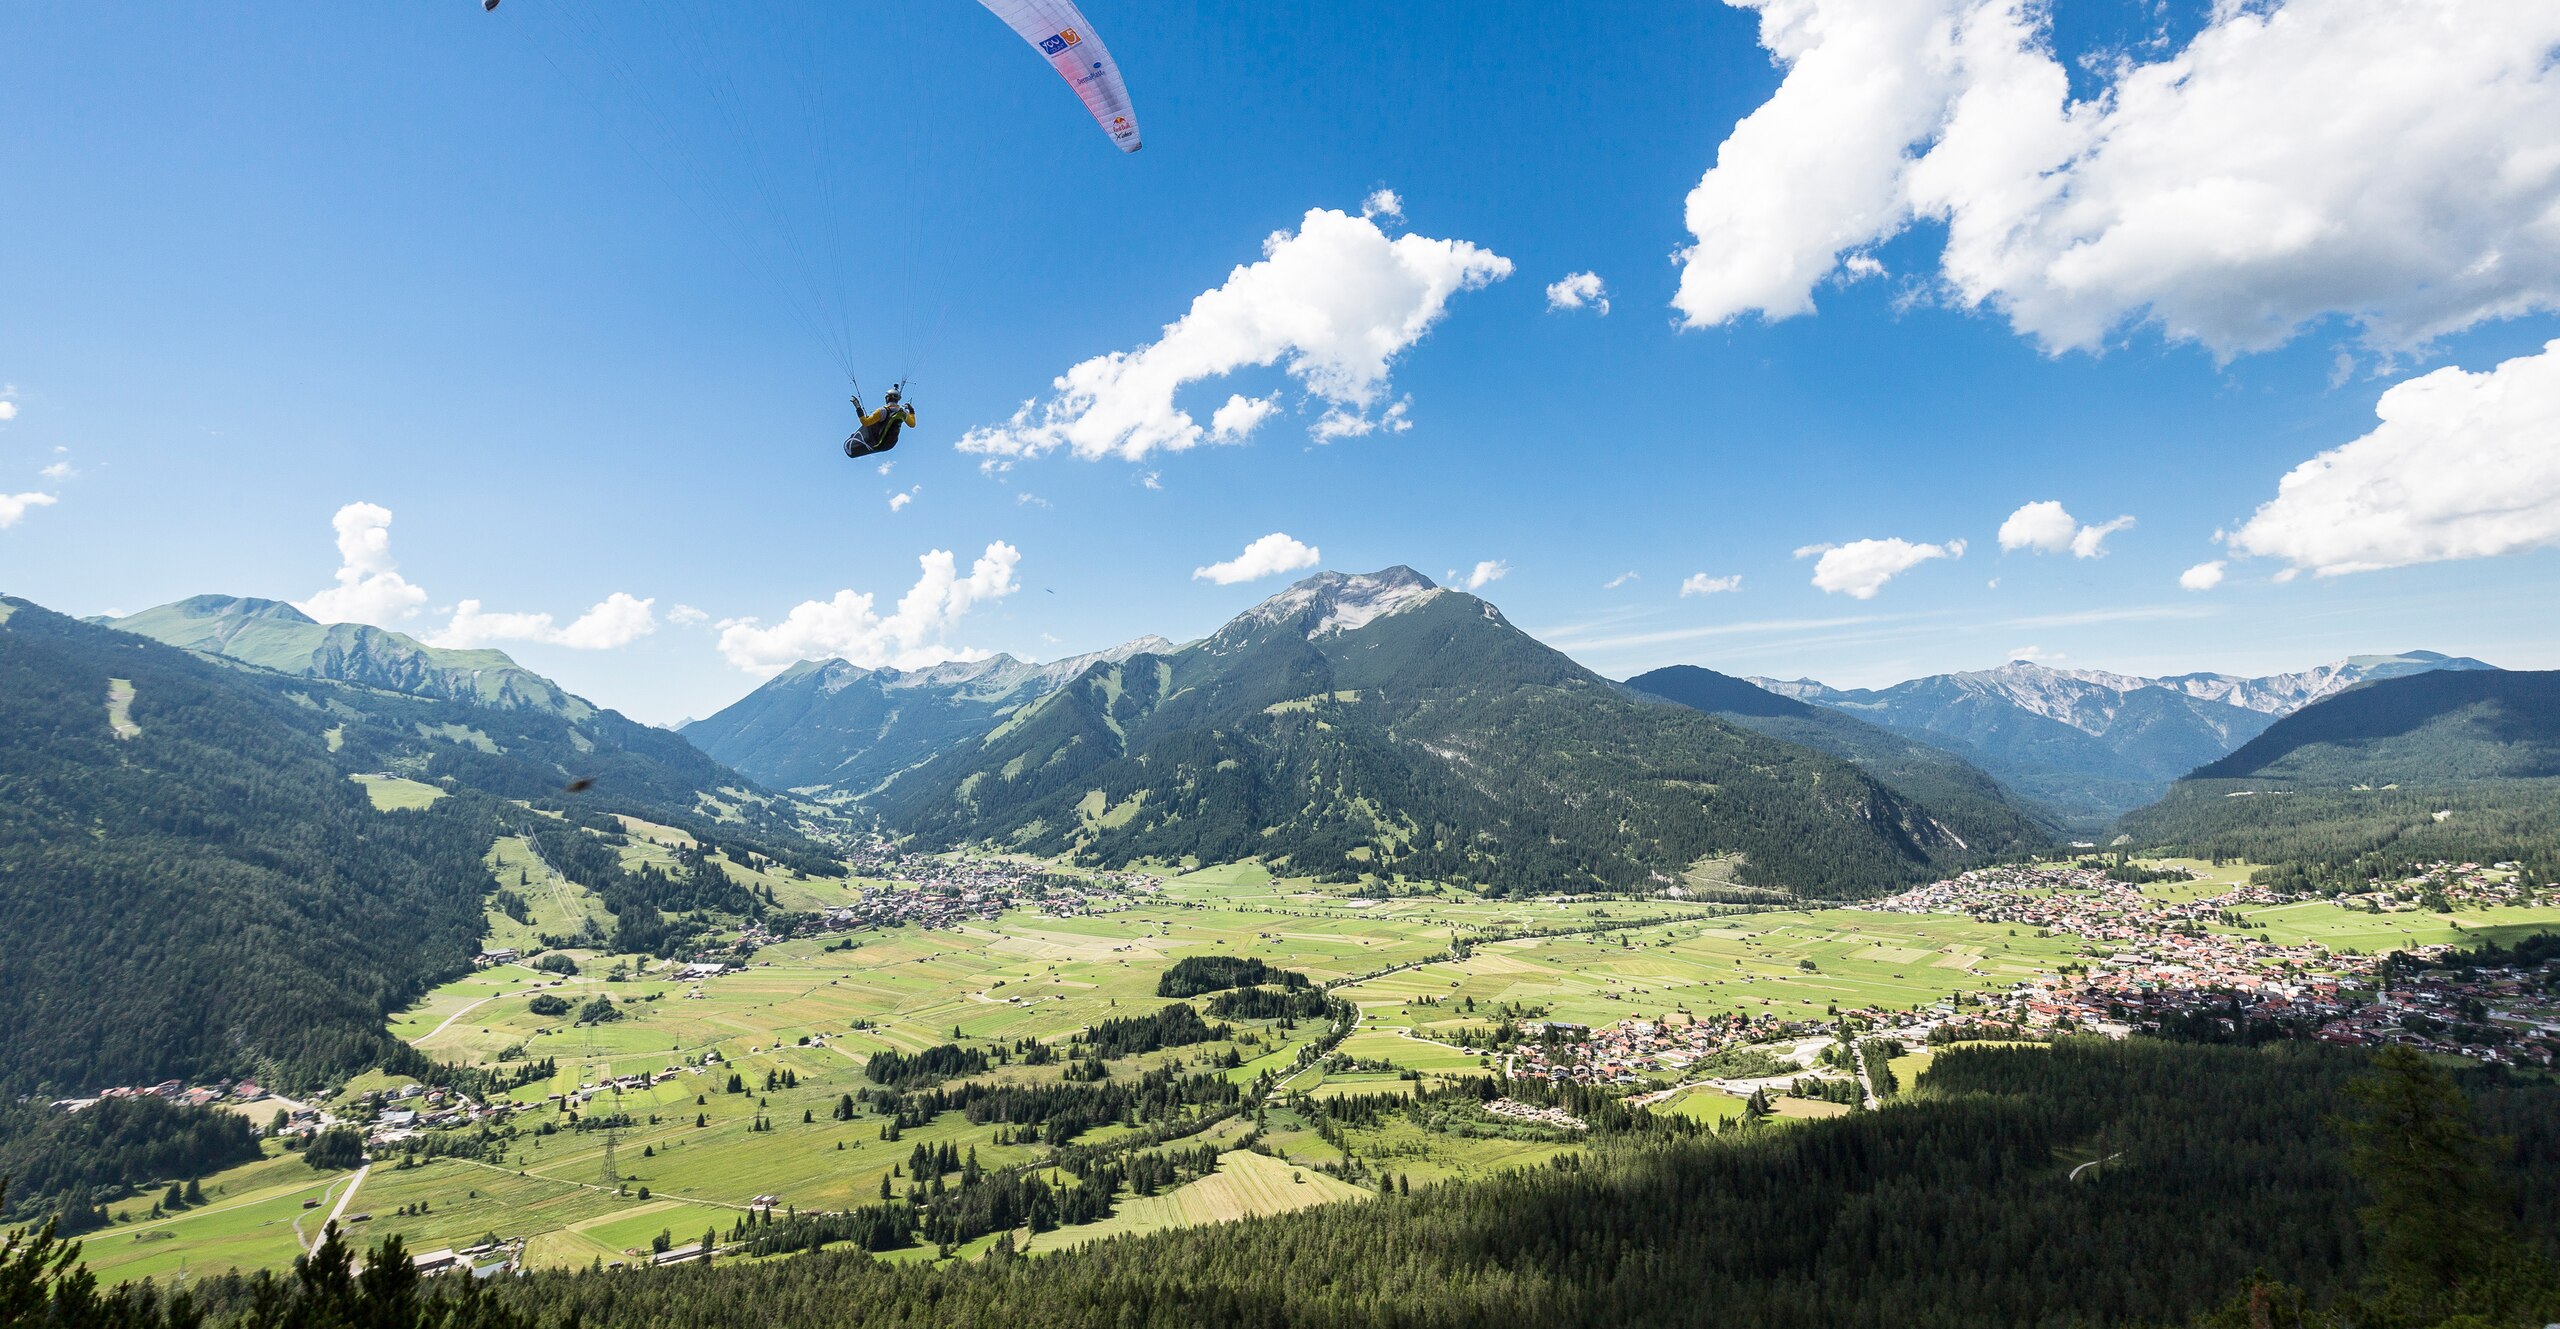 Christian Maurer (SUI1) performs during the Red Bull X-Alps in Lermoos, Austria on July 5th, 2017